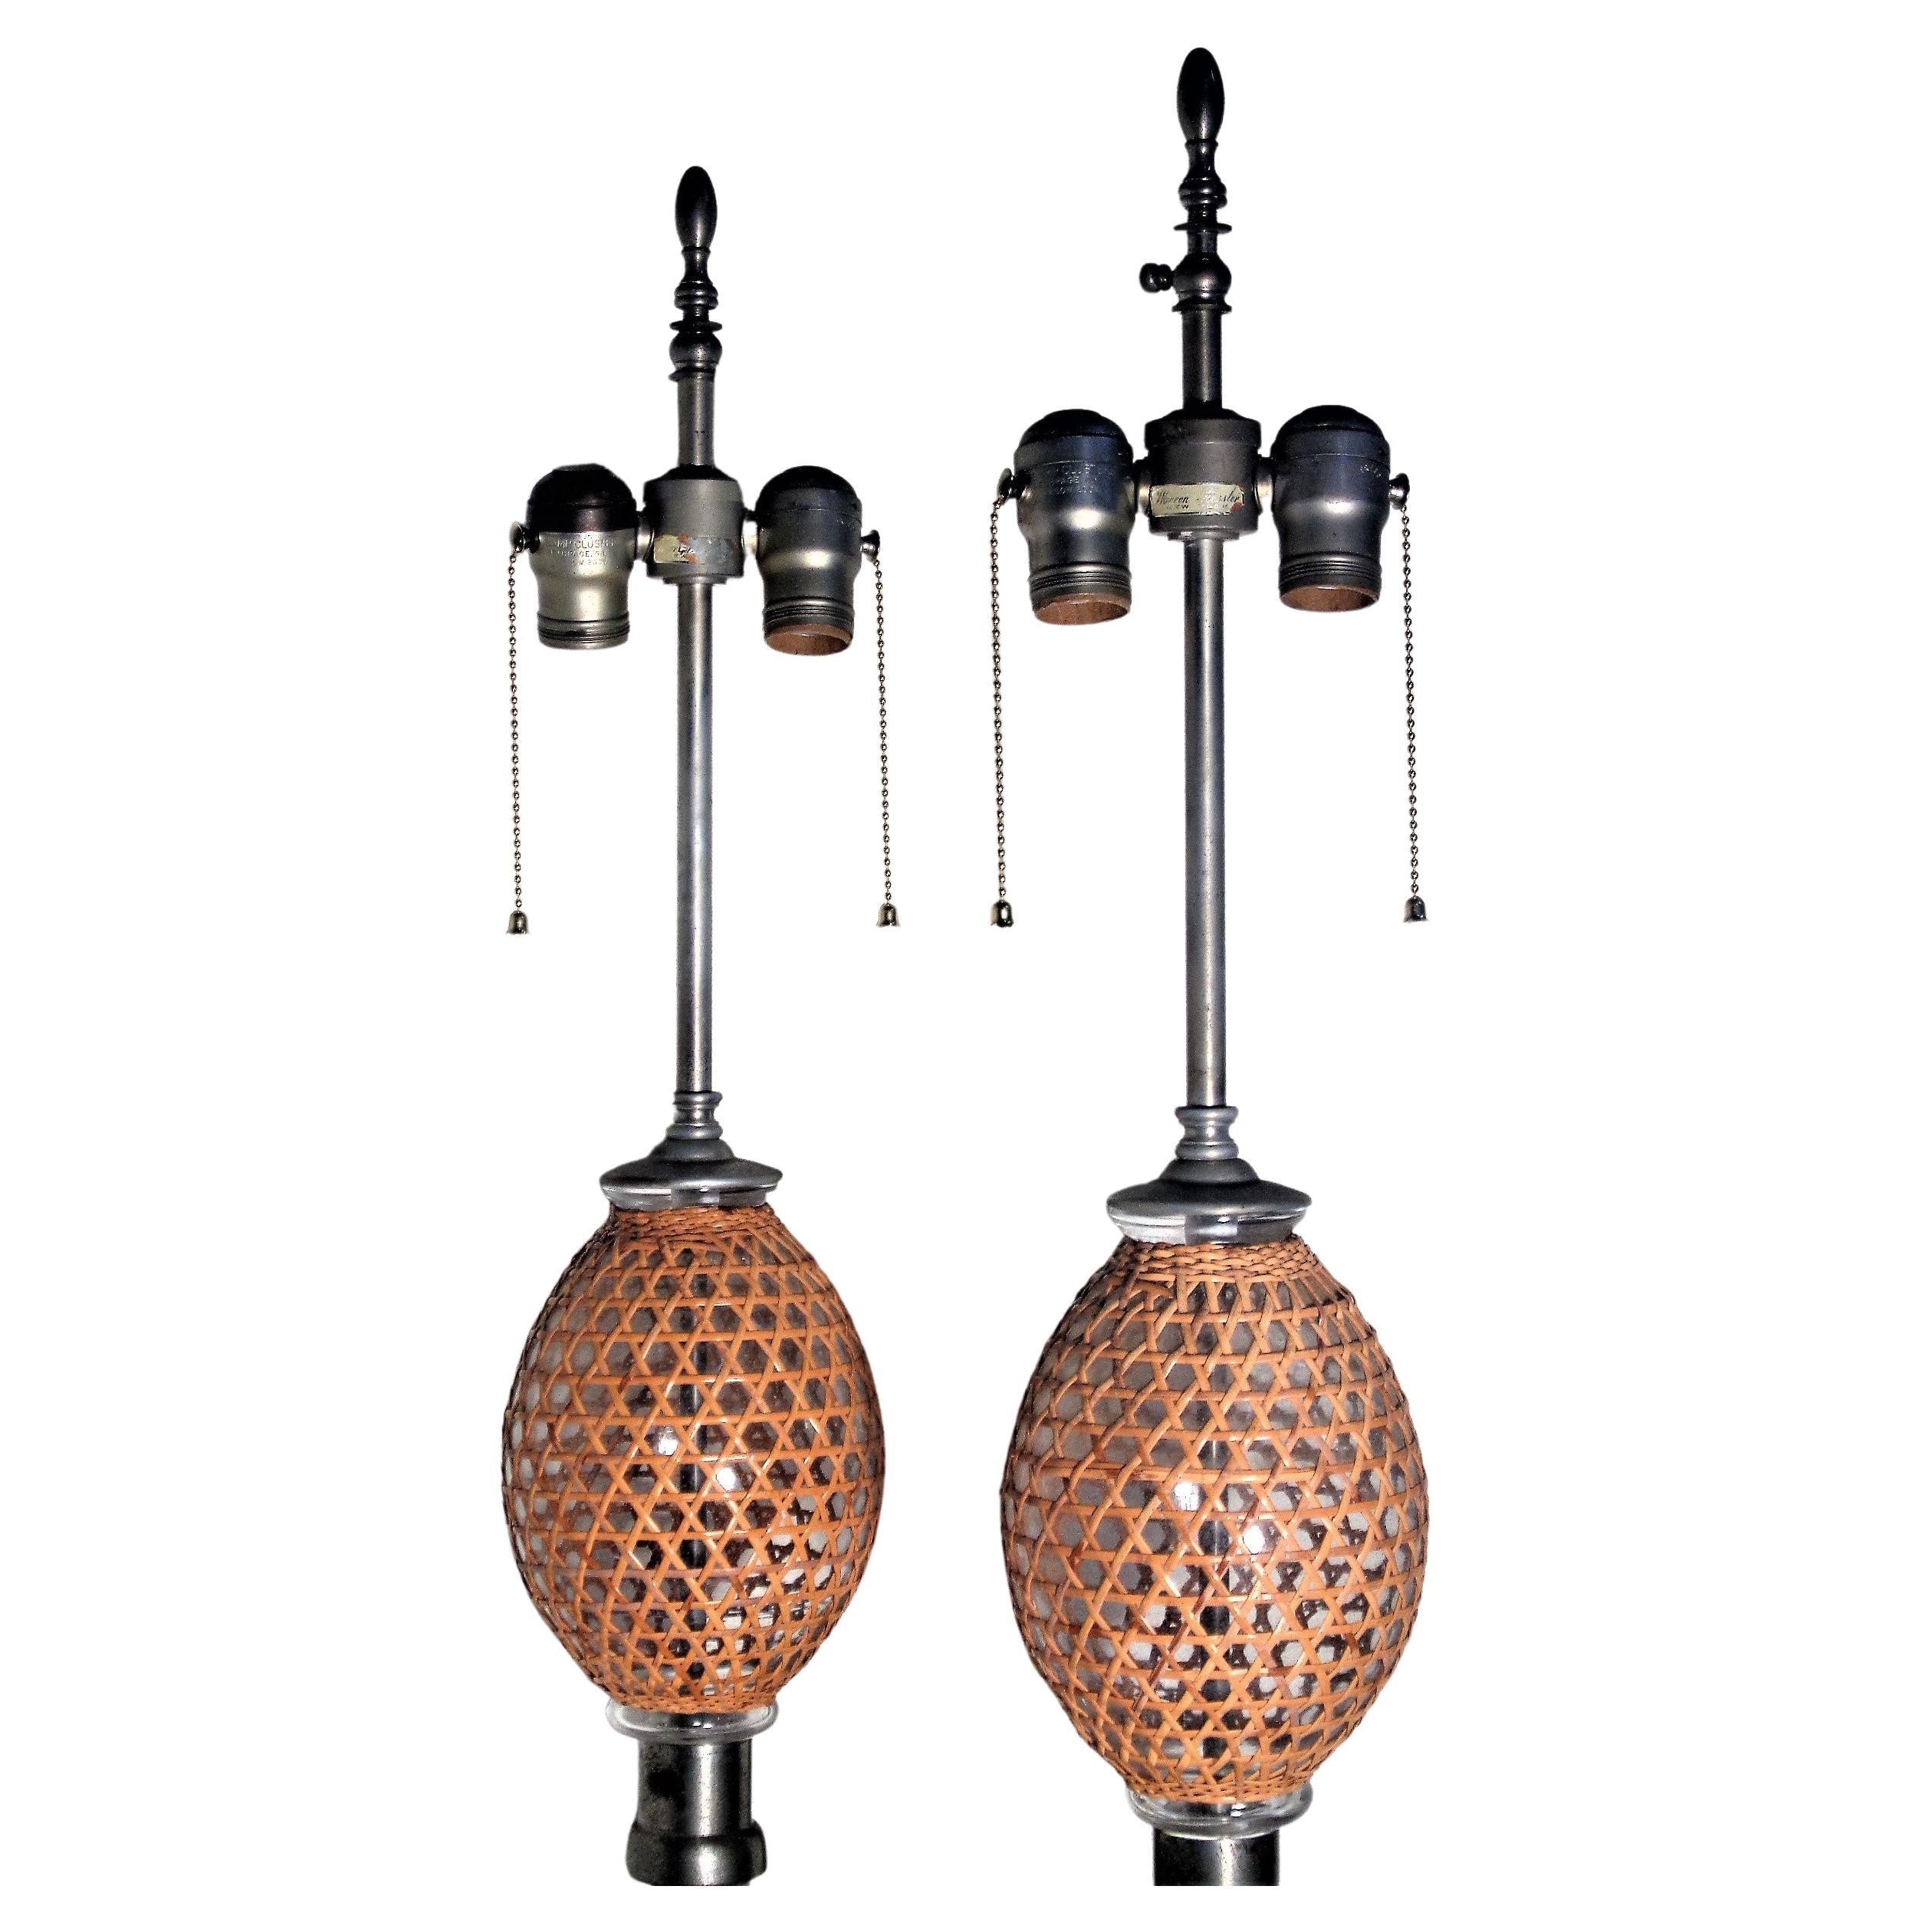 Pair of French seltzer bottle lamps each with two rattan wicker wrapped glass globes, pewter fittings and circular white porcelain bases. Overall beautifully aged original condition. Warren Kessler, New York foil labels at top of sockets. Circa